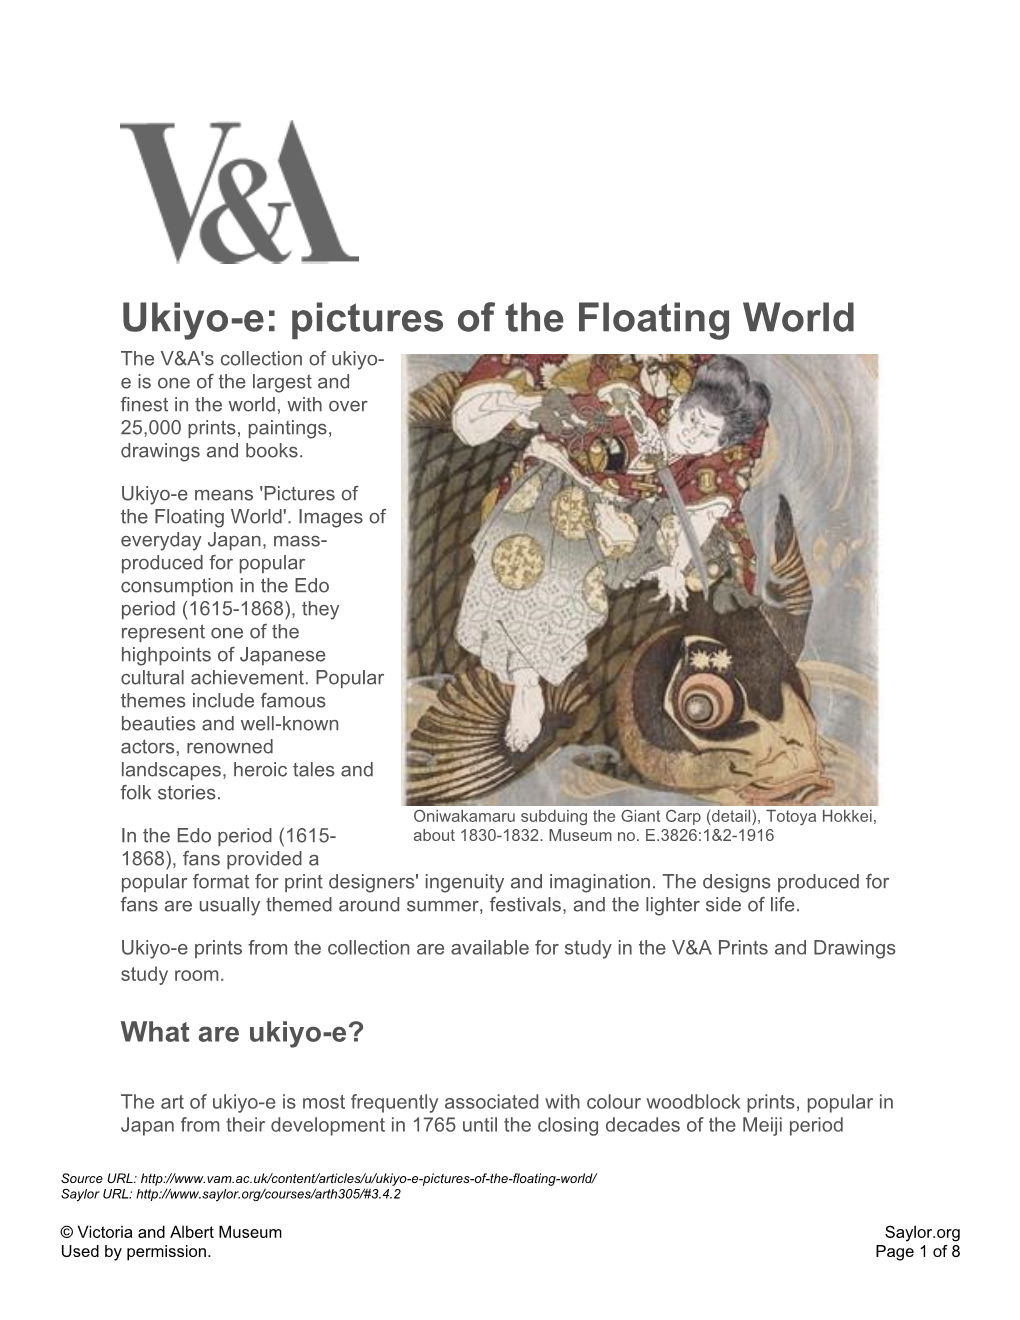 Ukiyo-E: Pictures of the Floating World